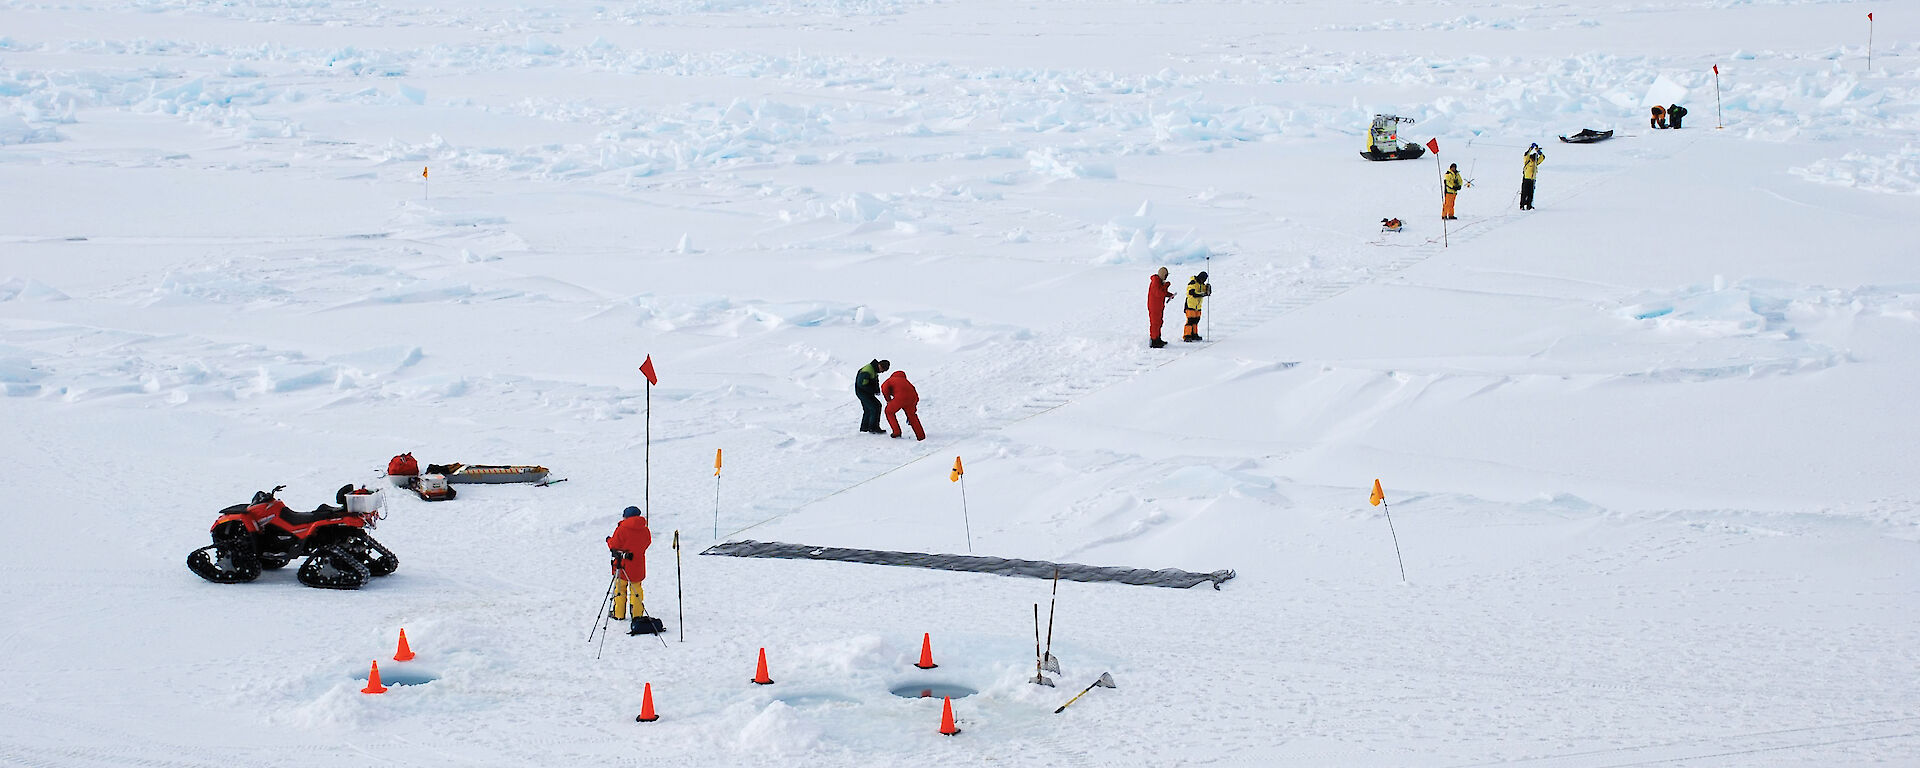 A 200m transect marked out on the sea ice at Ice Station 6.